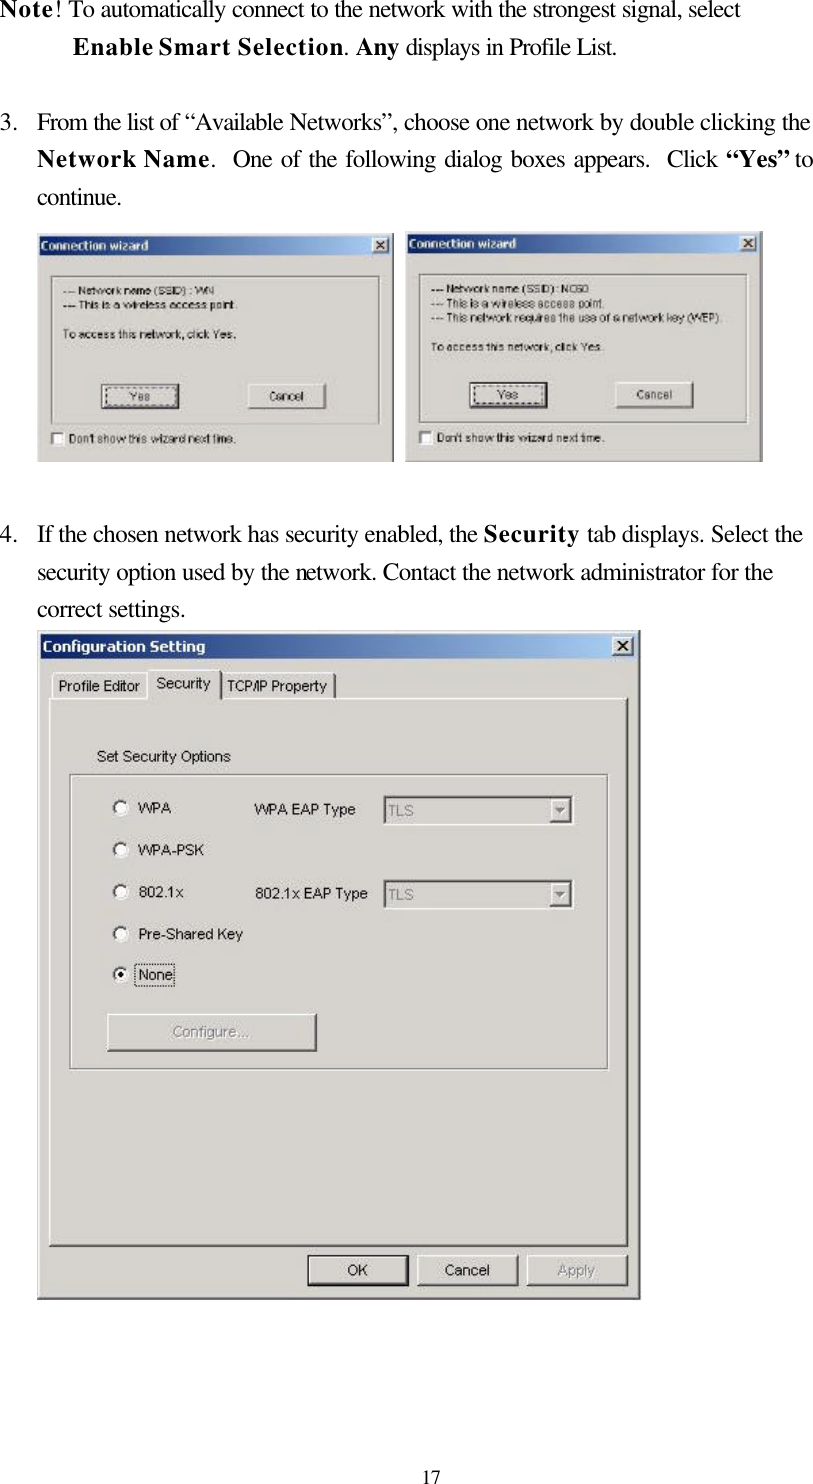  17 Note! To automatically connect to the network with the strongest signal, select Enable Smart Selection. Any displays in Profile List.  3.  From the list of “Available Networks”, choose one network by double clicking the Network Name.  One of the following dialog boxes appears.  Click “Yes” to continue.     4.  If the chosen network has security enabled, the Security tab displays. Select the security option used by the network. Contact the network administrator for the correct settings.     